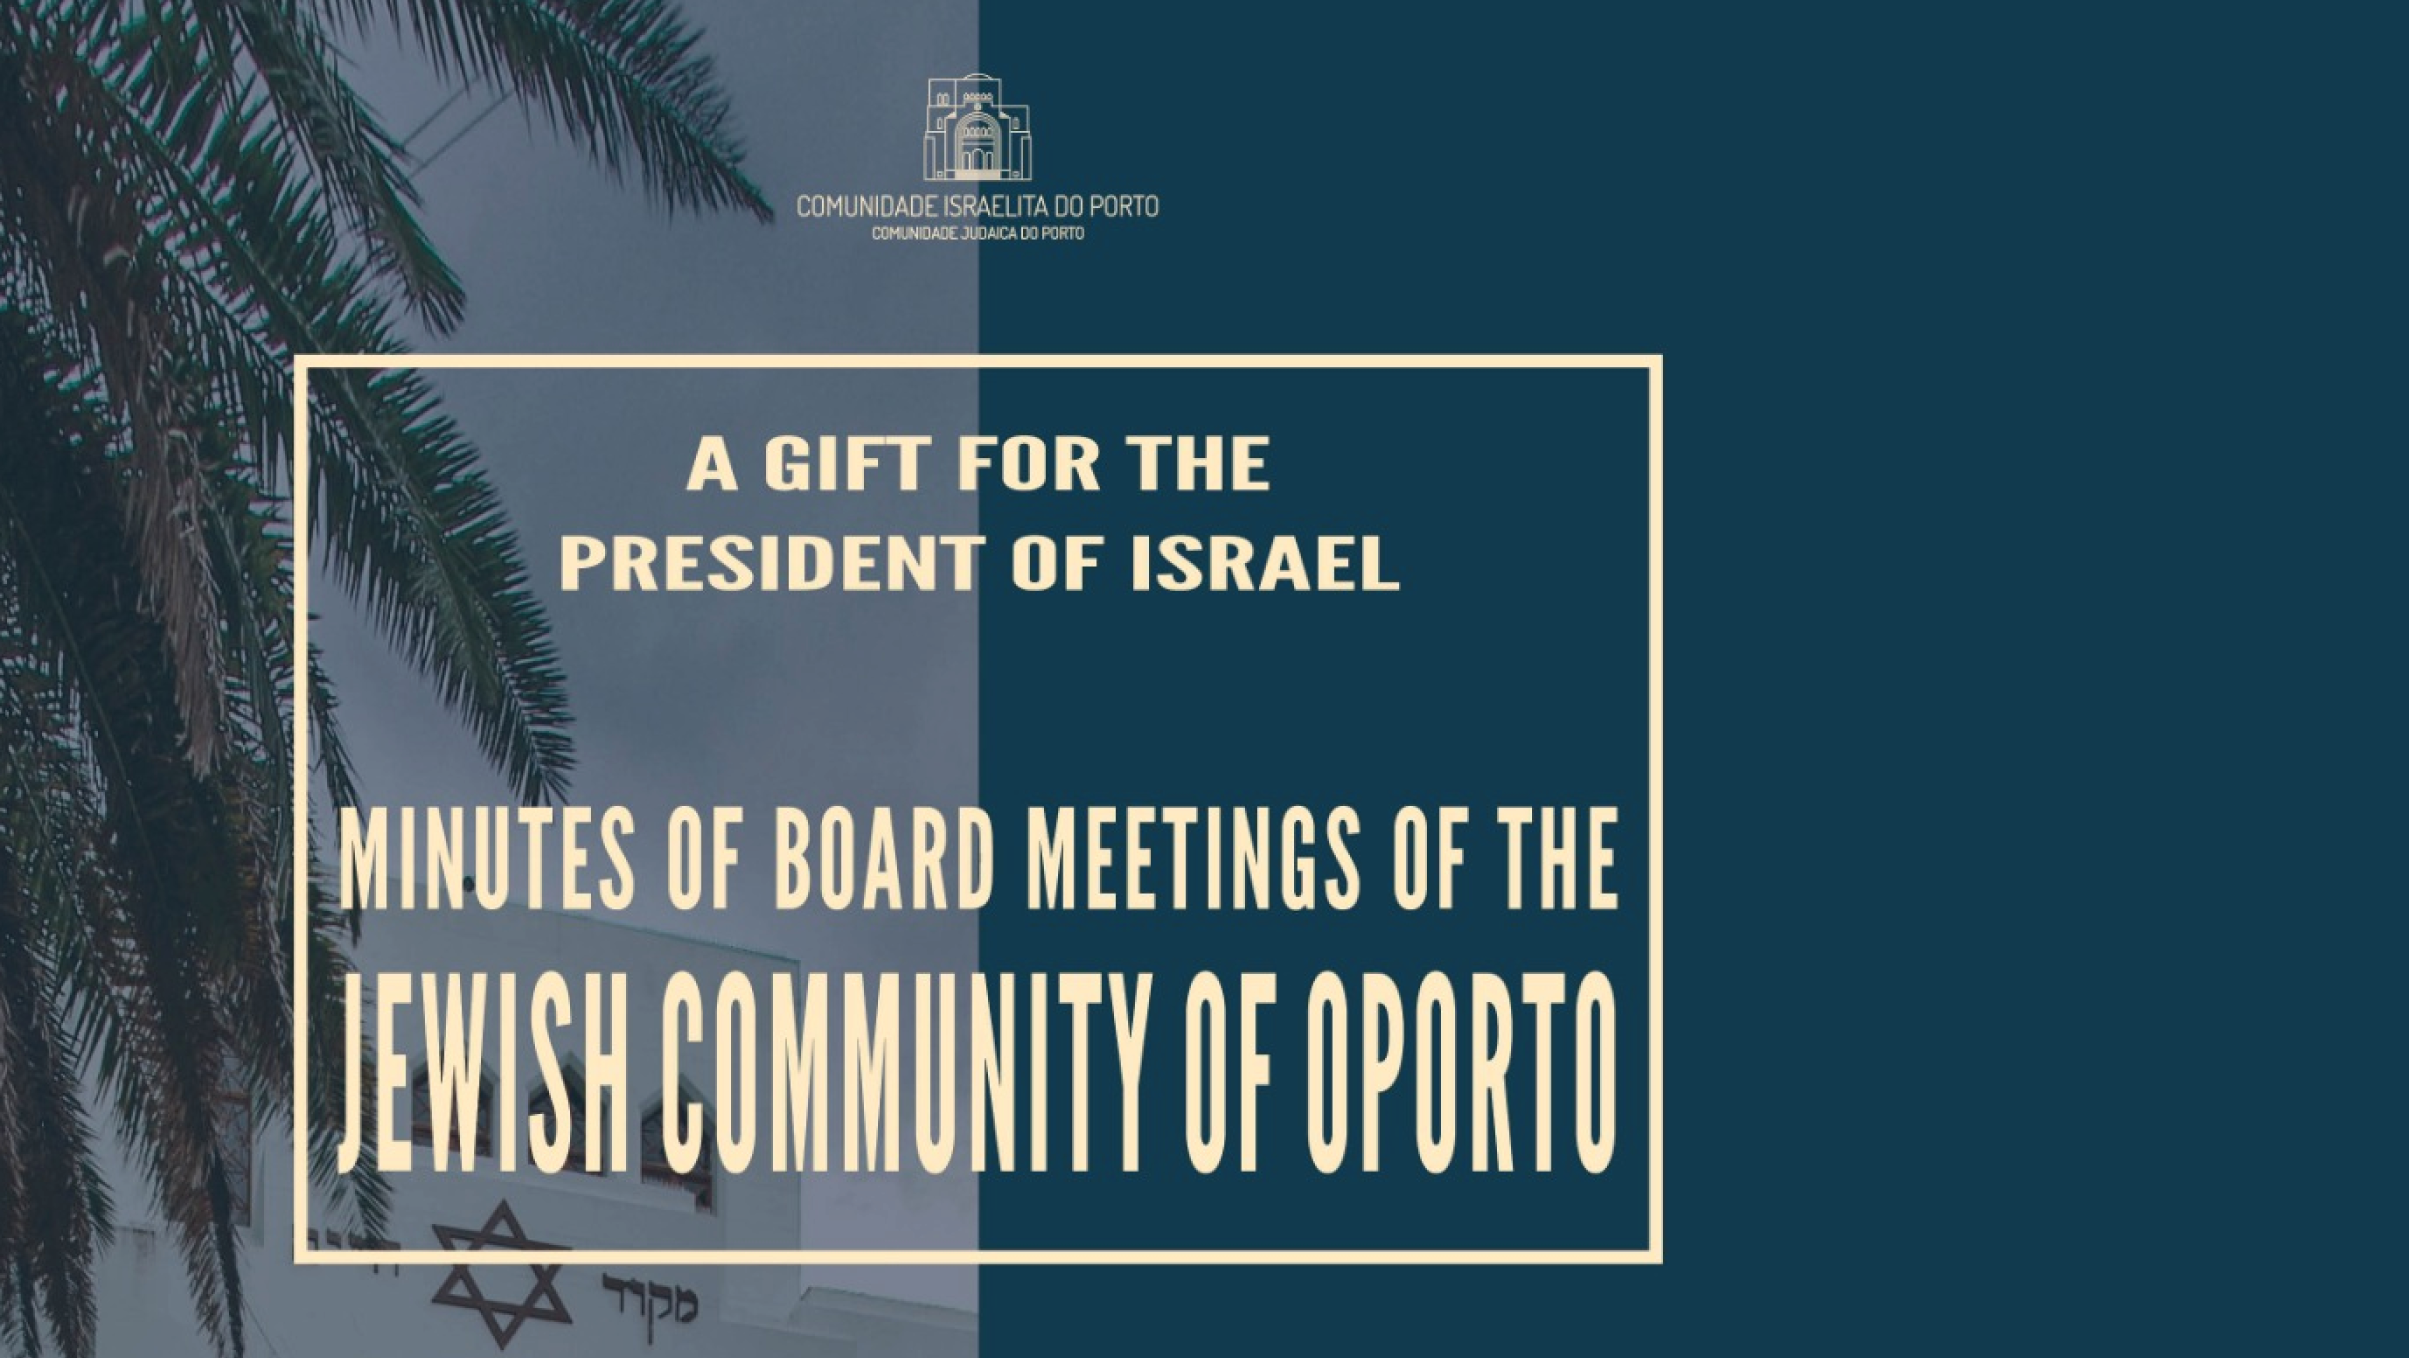 Oporto Jewish Community gives a book to the President of Israel